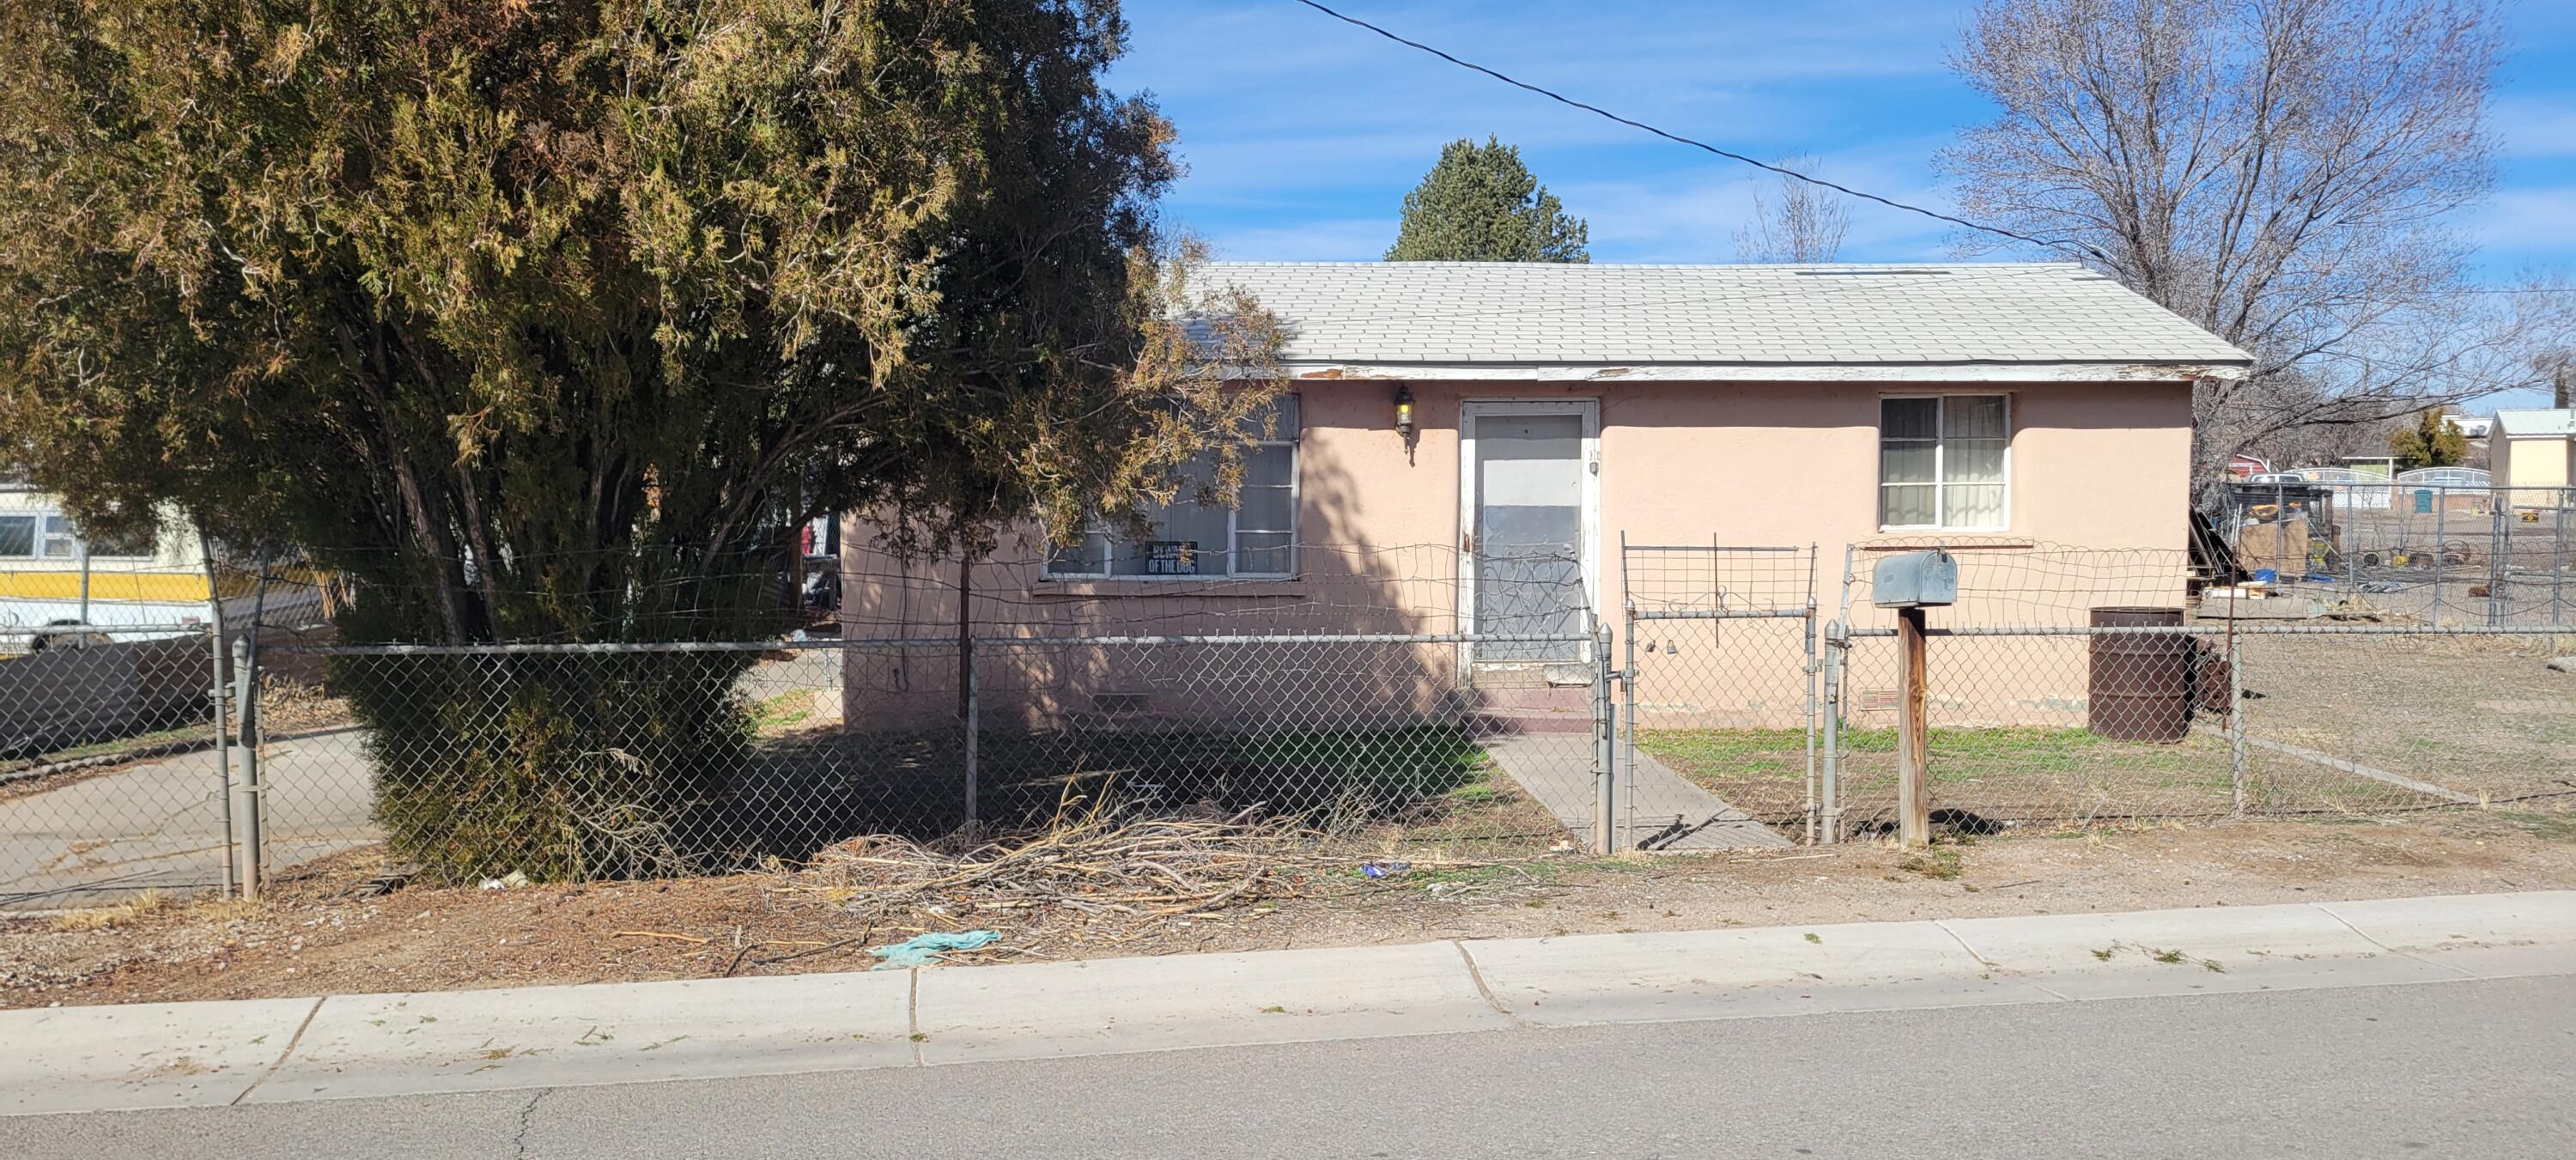 Located in the Heart of the South Valley, this 0.16 acre lot, FIXER-UPPER is Ideal for anyone who can ''renovate.'' Property needs repairs. There is opportunity to have more than just the main house on property. (Think workshop or casita). Selling As-Is.